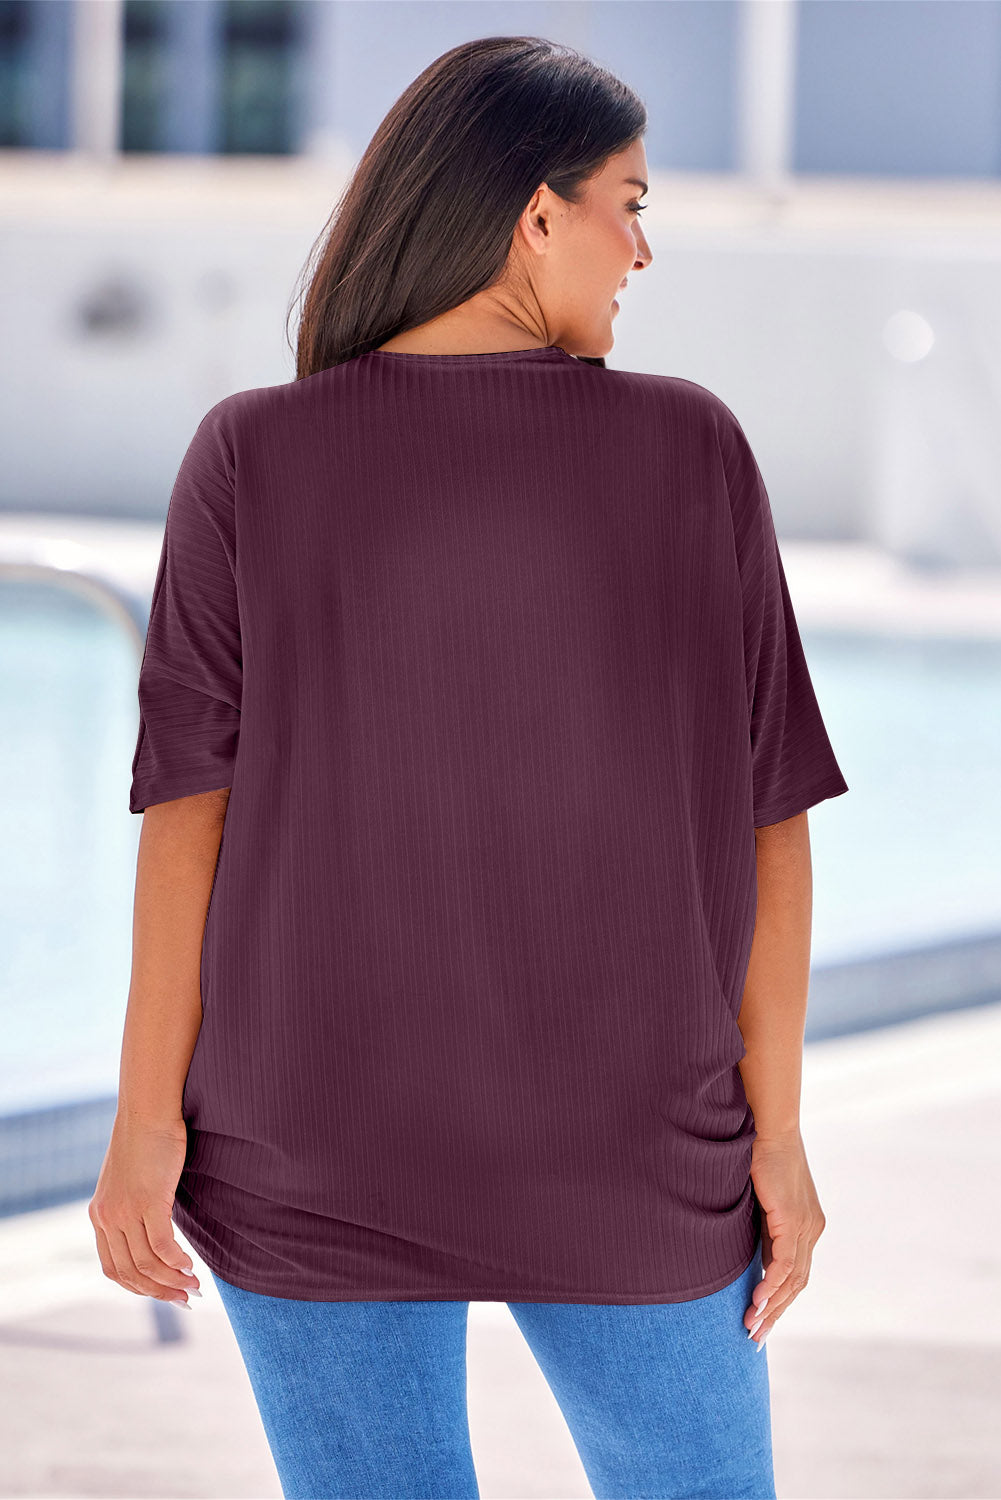 Purple Shimmer Ribbed Texture Plus Size Cardigan